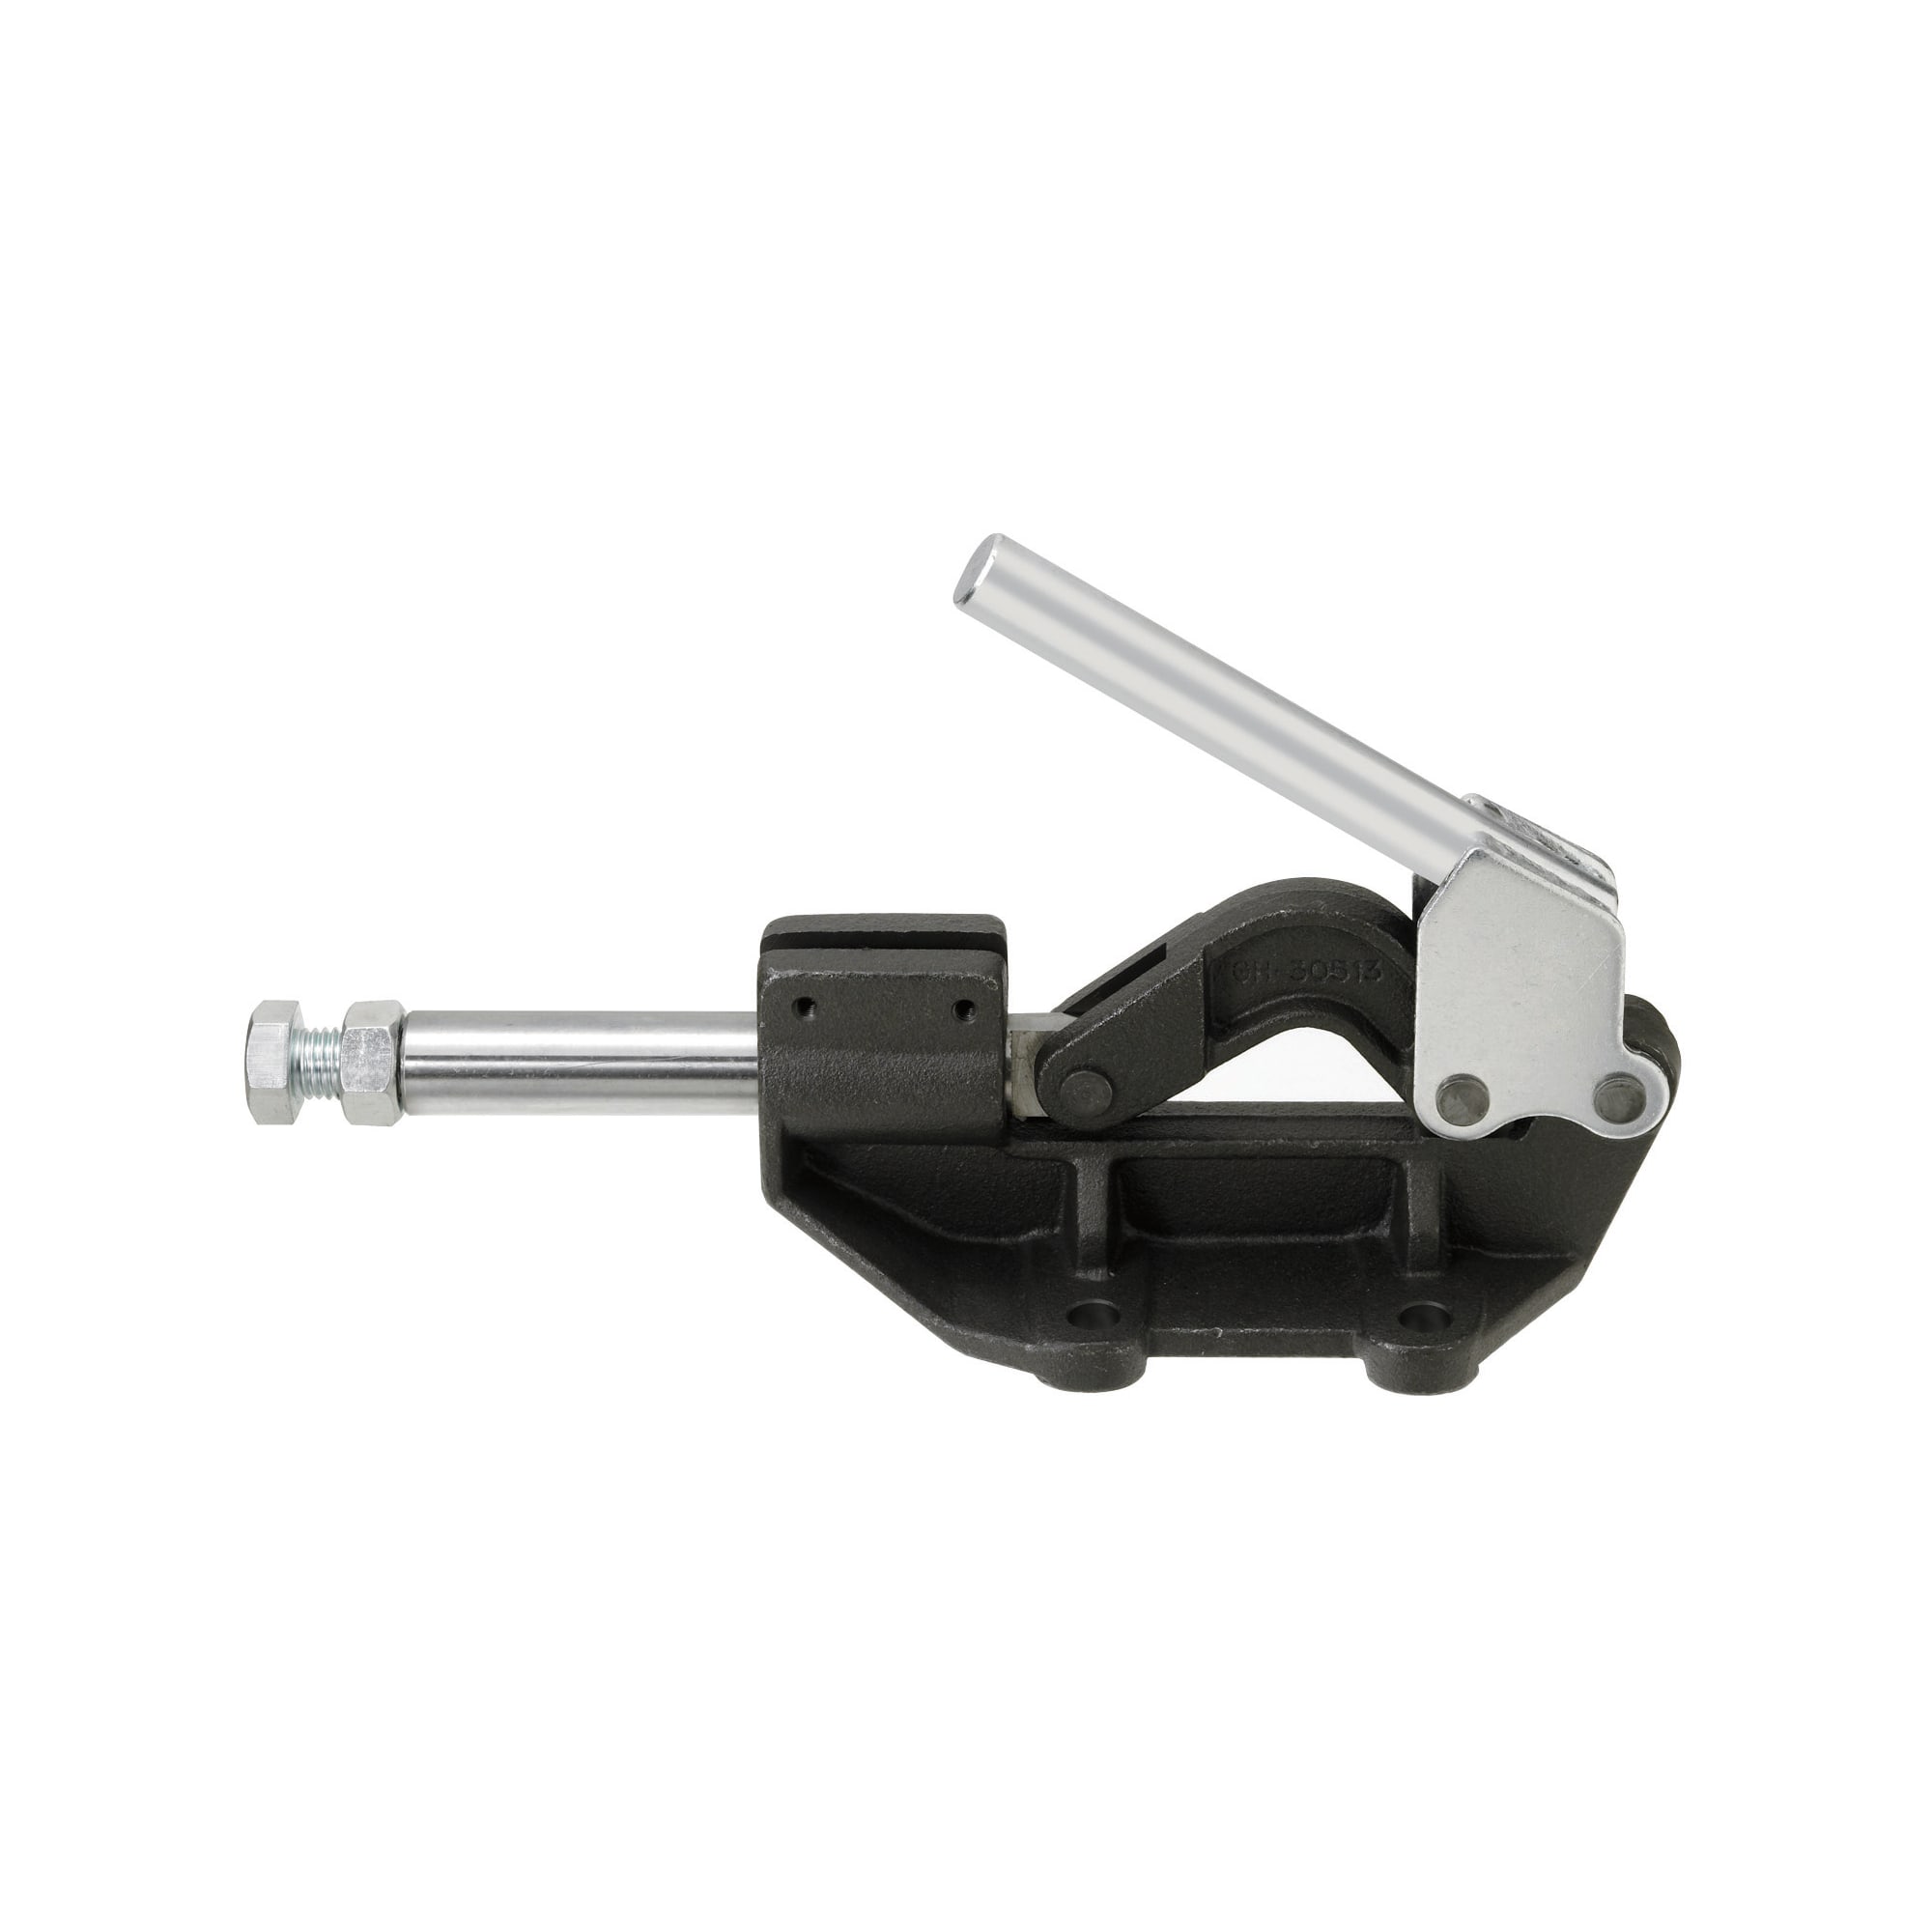 Toggle Clamps - Smooth Stroke, Flange Base, Tightening Force 1960 N